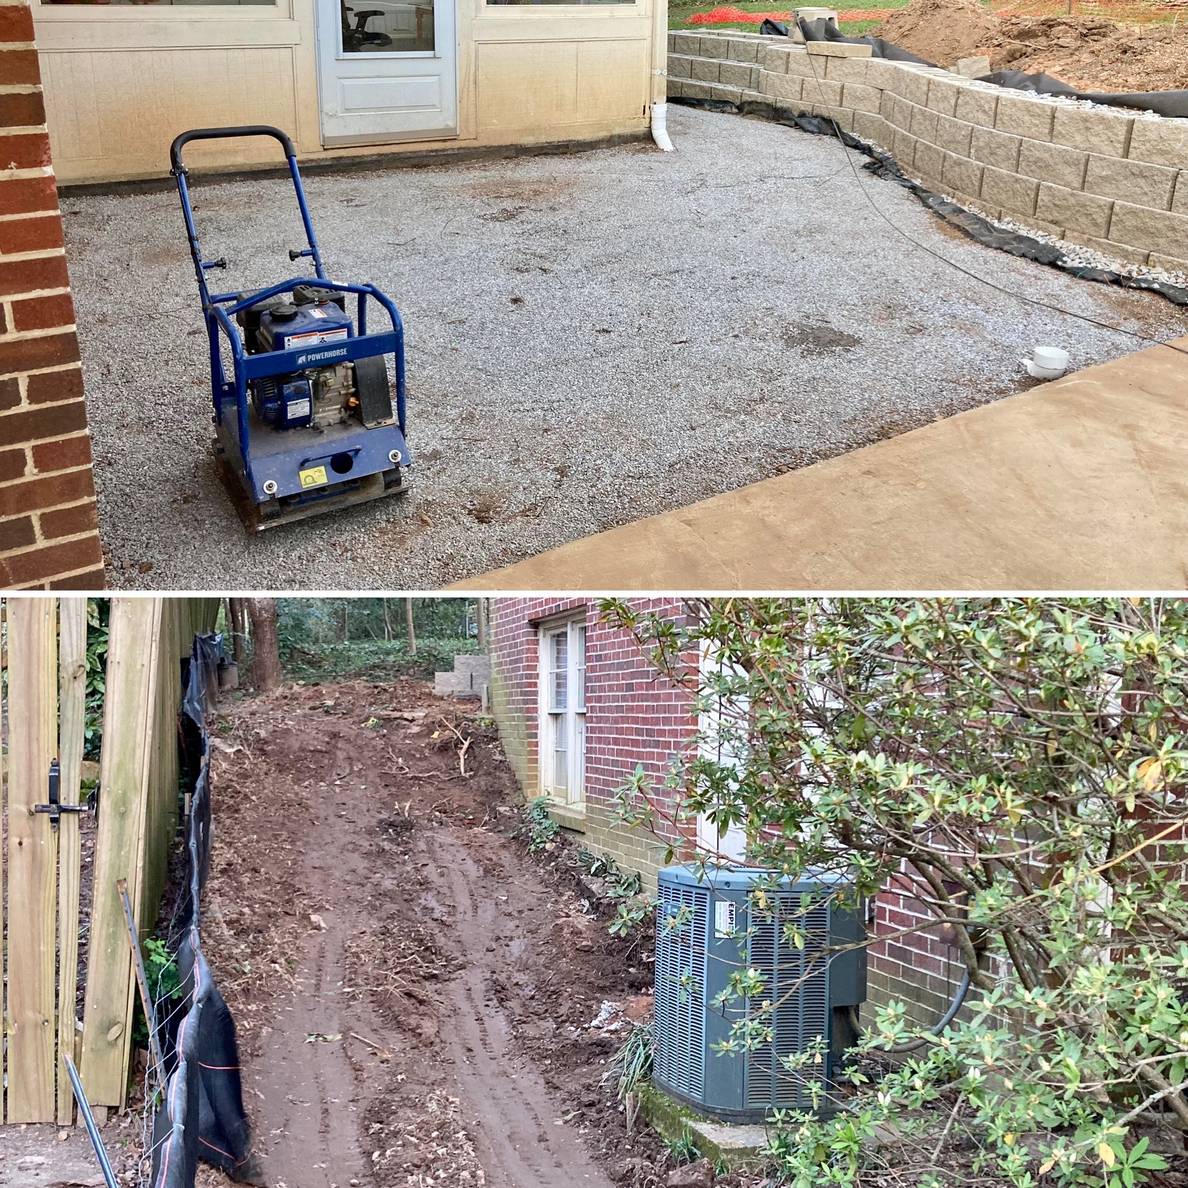 Two photos: one shows a sun porch and retaining wall in the background with an open area in the foreground with a layer of small crushed stone. The other shows a slope of Georgia clay along the side of a house.